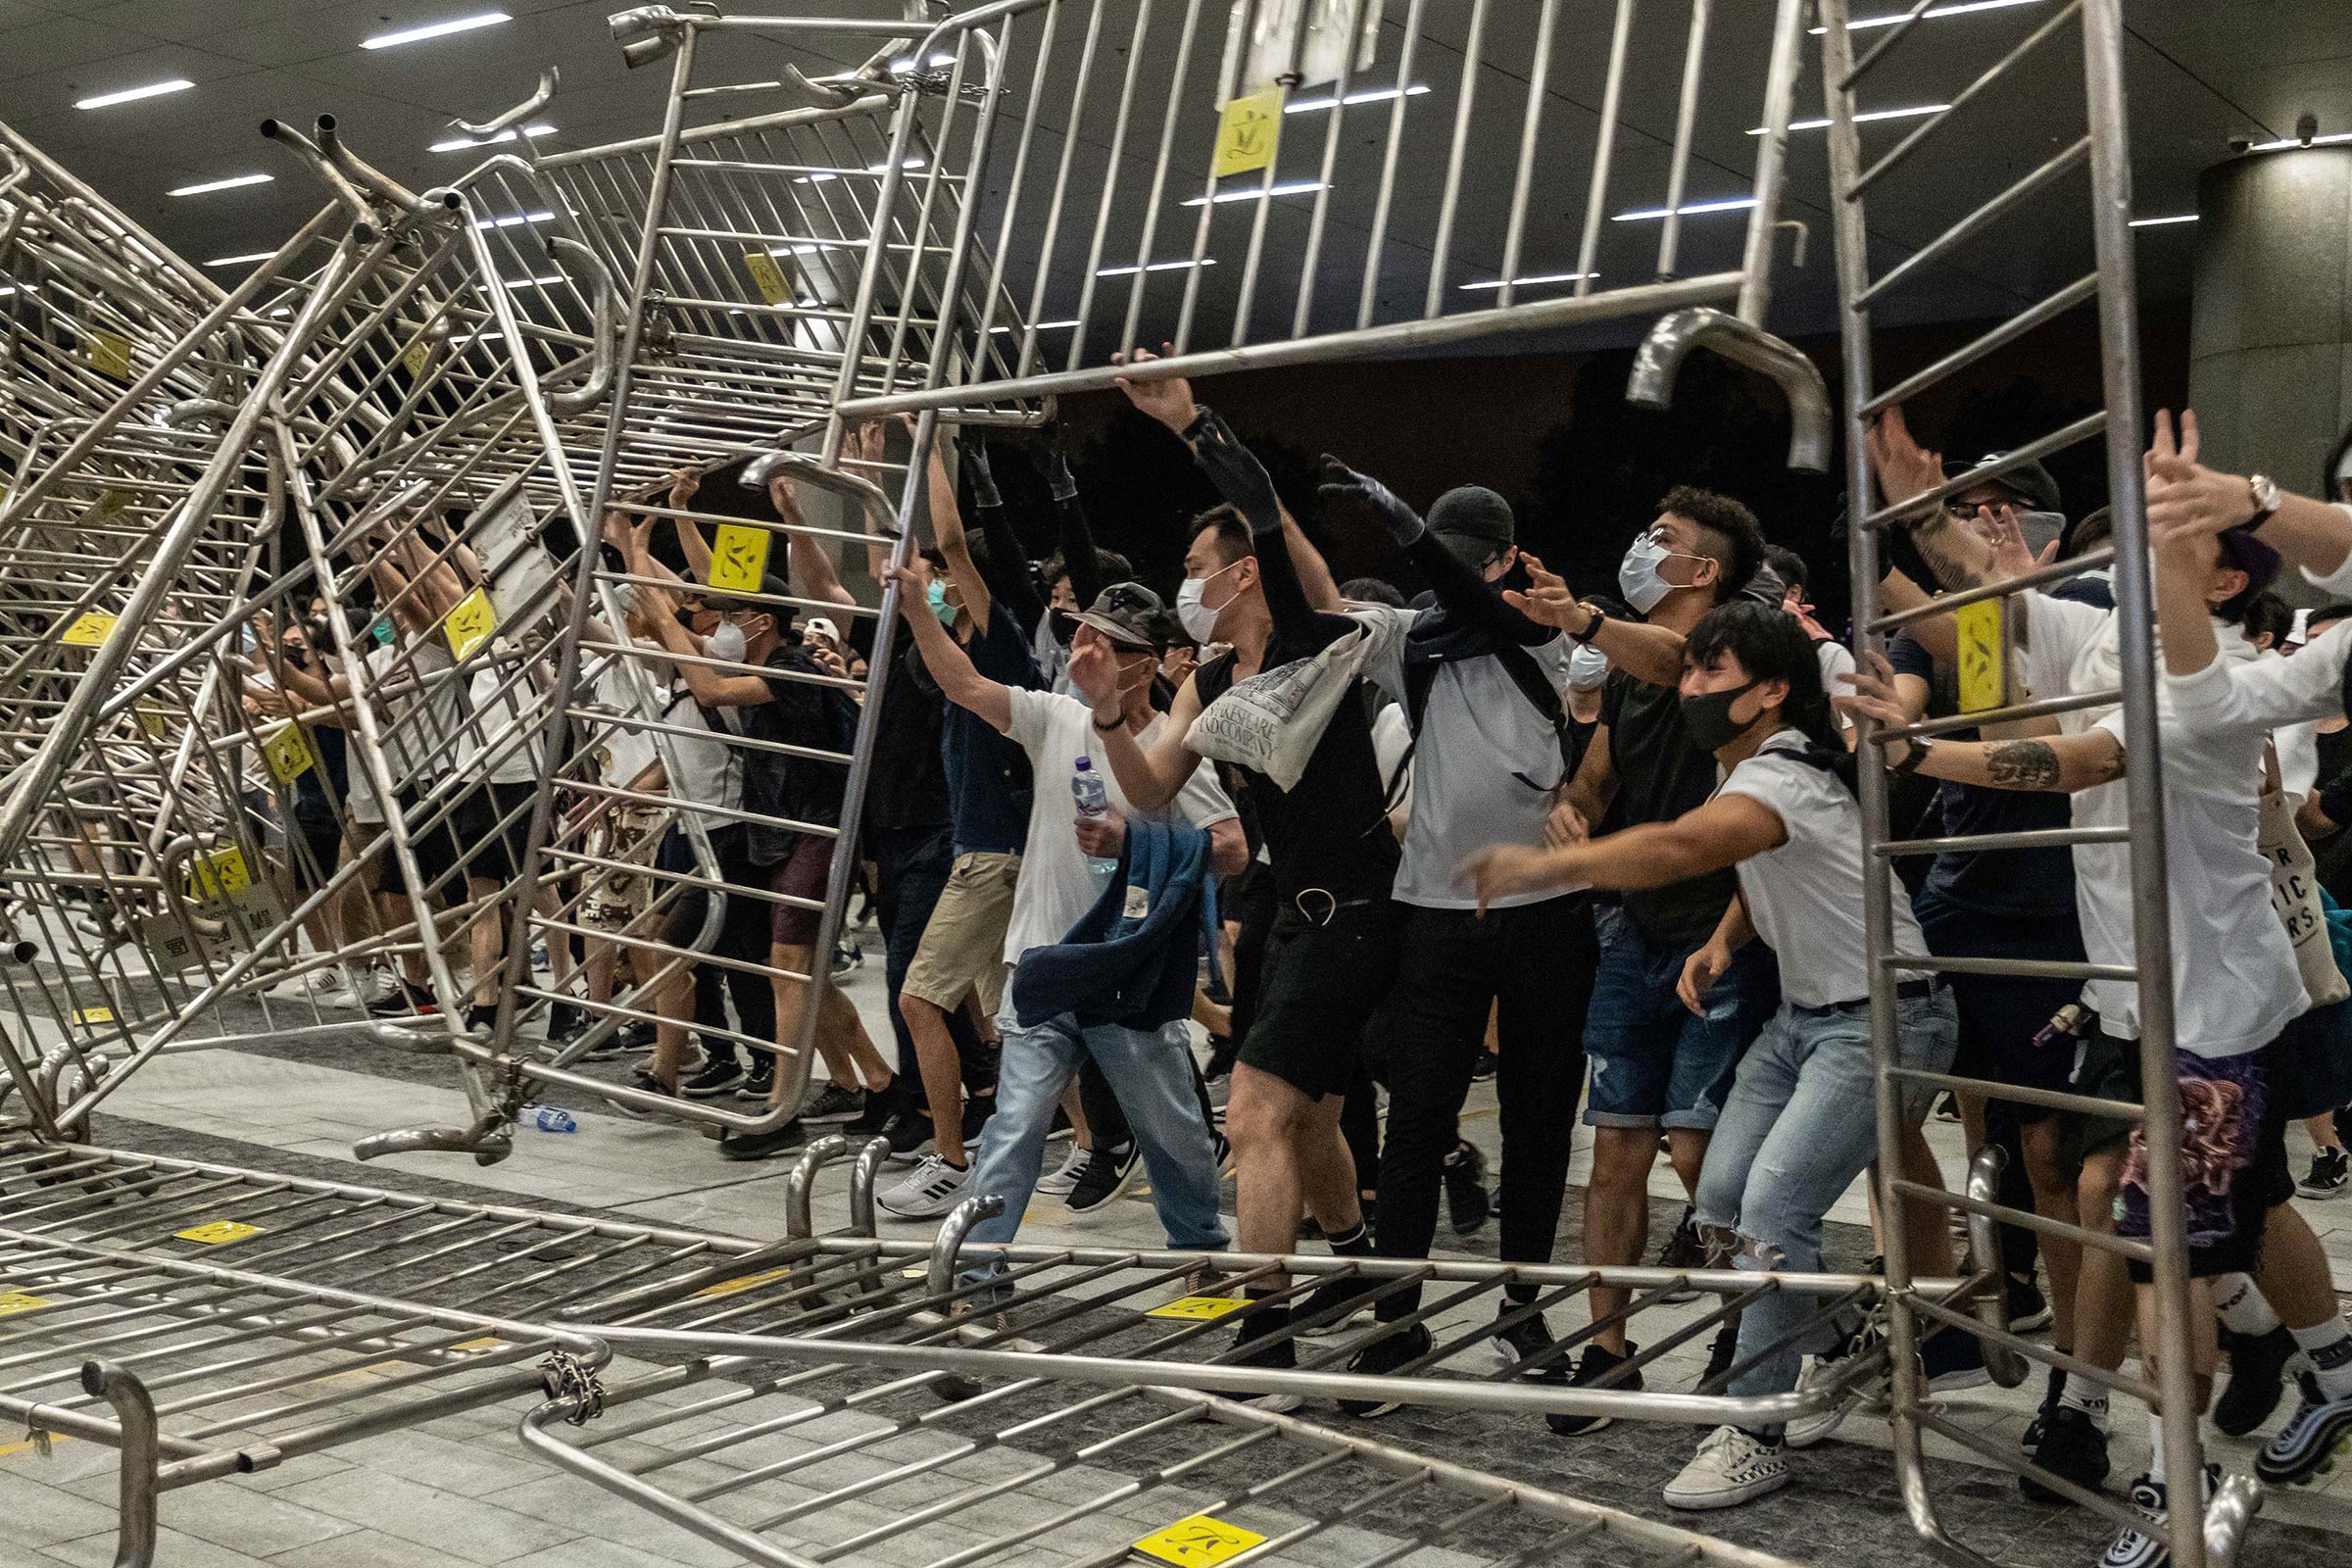 Demonstrators overturn metal barriers on June 10, as protests against the extradition law turn violent. (Lam Yik Fei—The New York Times/Redux)